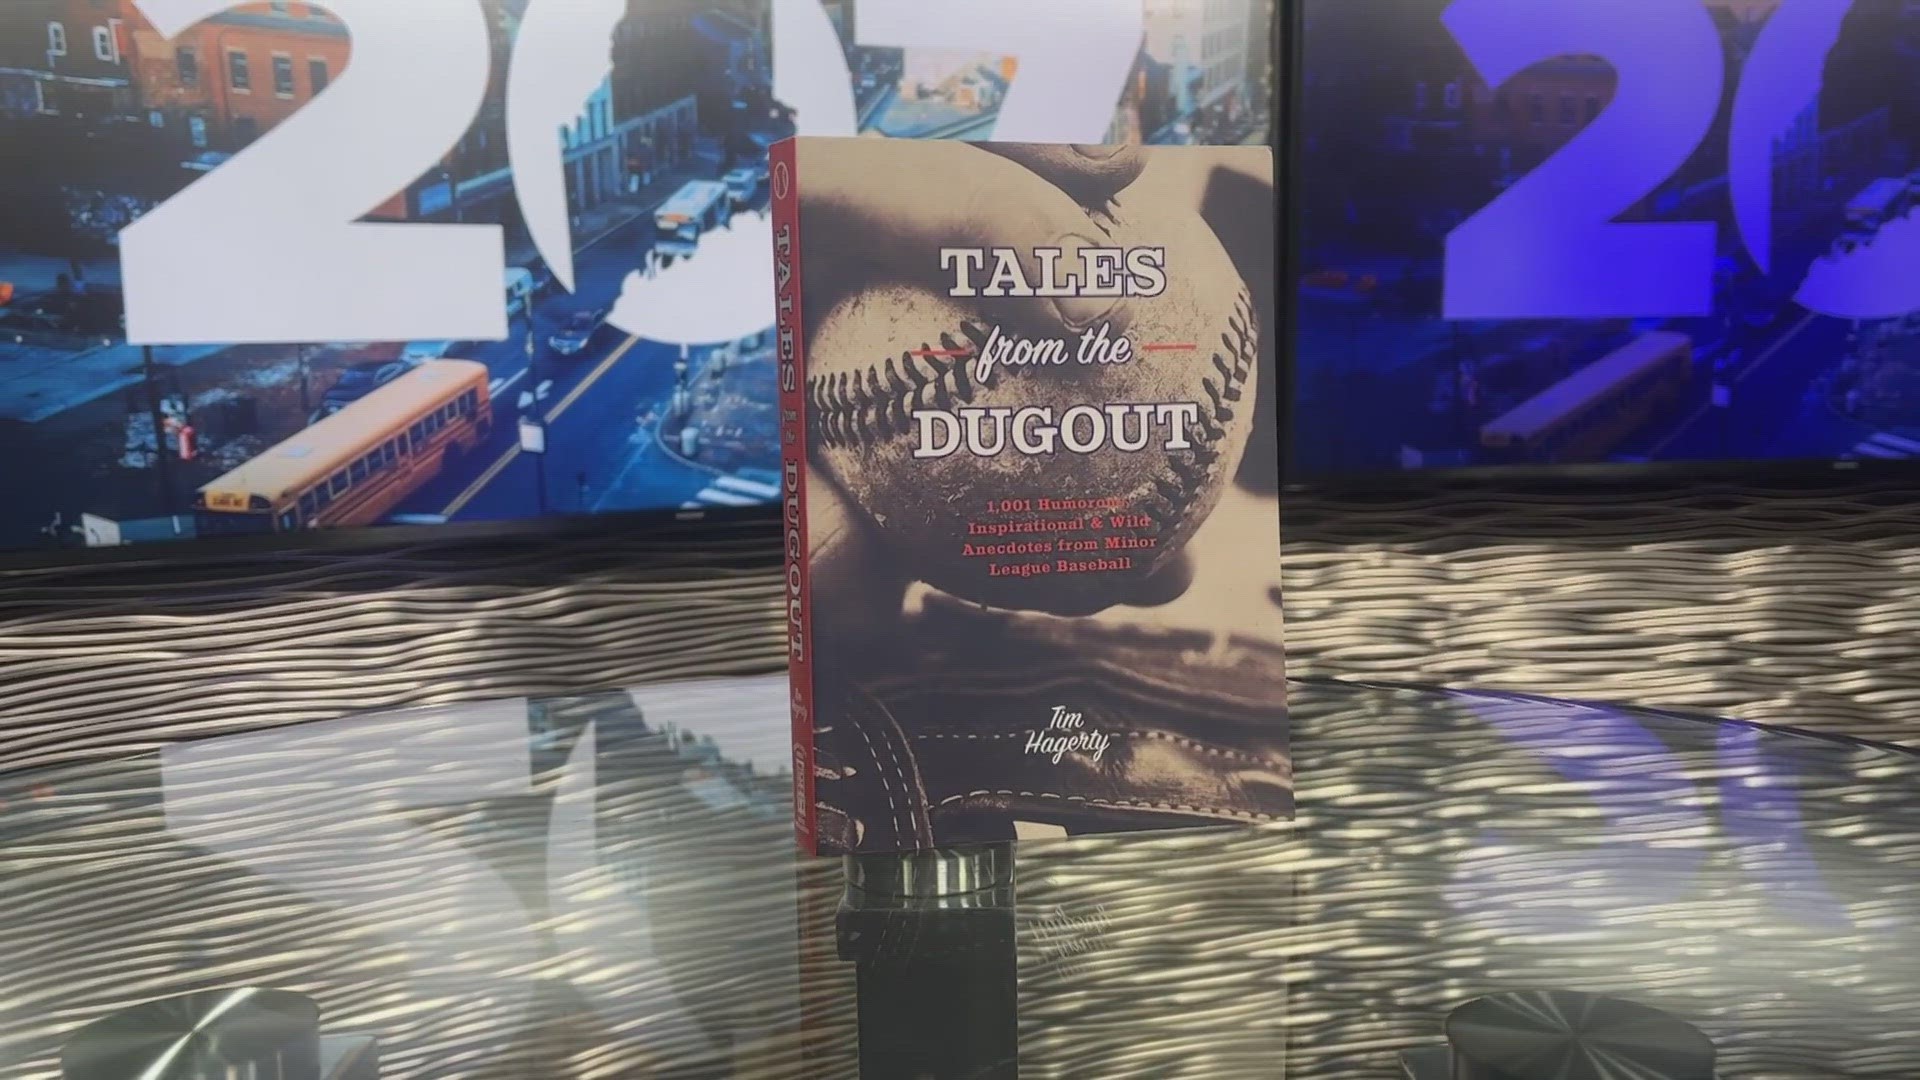 In "Tales From the Dugout," writer Tim Hagerty tells often humorous historical anecdotes from minor league baseball fields across the U.S.